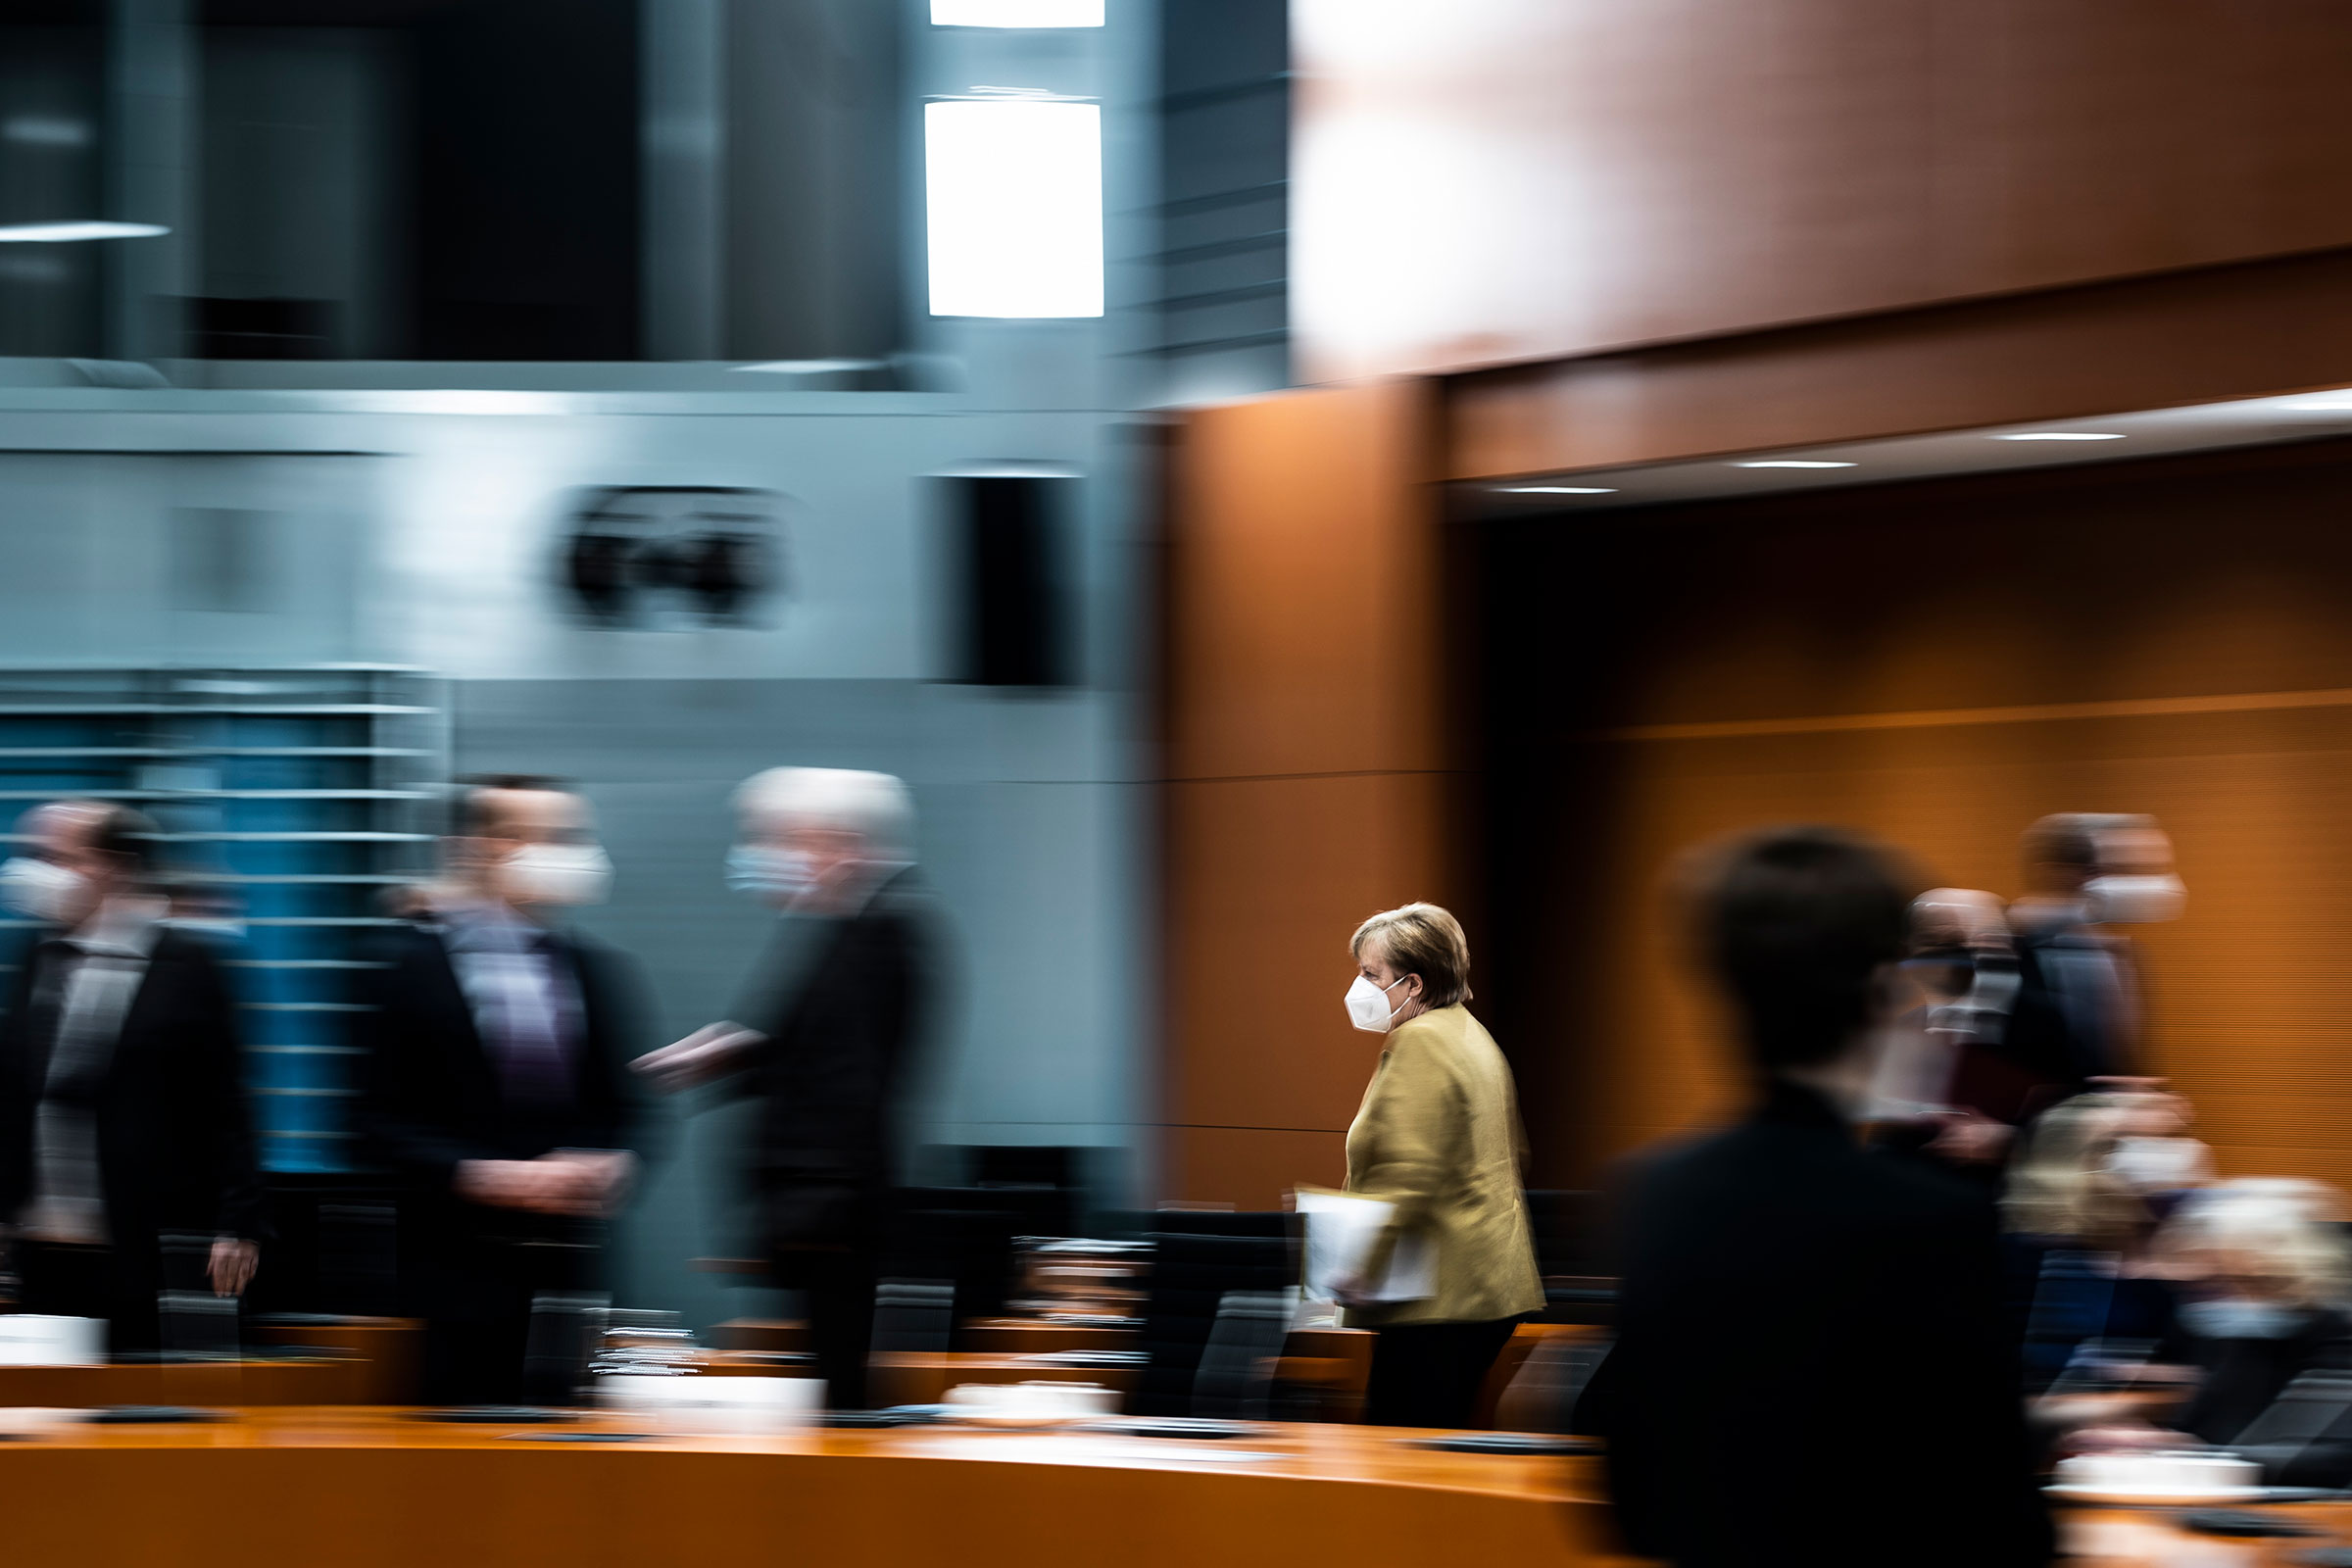 German Chancellor Angela Merkel arrives for the weekly meeting of the cabinet in Berlin, Germany on March 17, 2021.